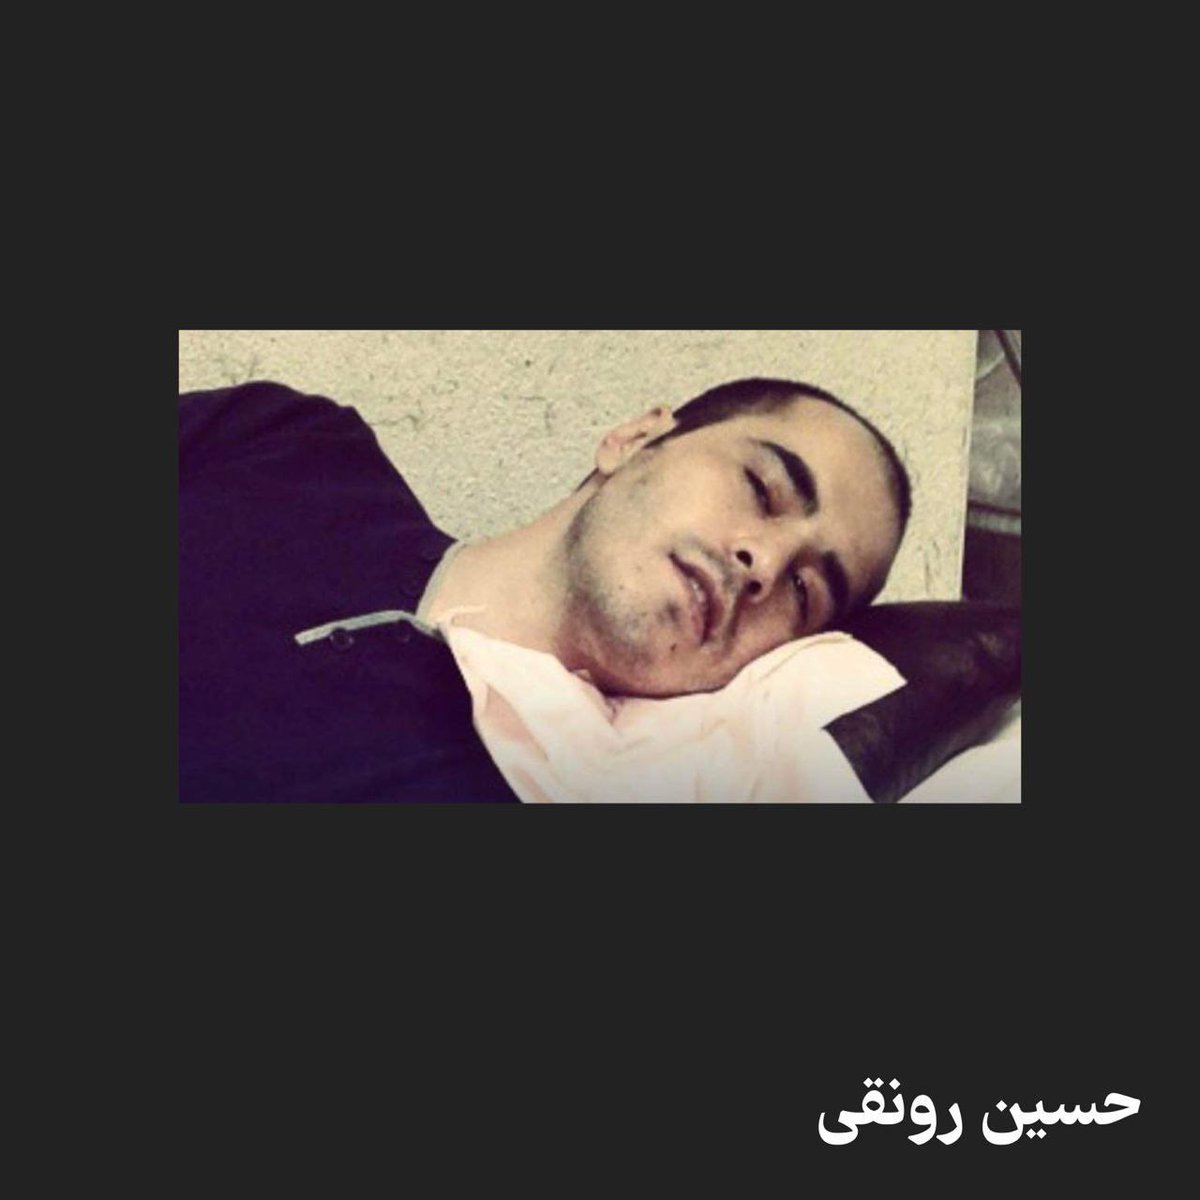 After 21 days of @HosseinRonaghi's arrest and hunger strike, his brother says he should be admitted to the hospital as soon as possible. However, the prison authorities do not care. 'Without treatment or medicine, with a broken leg, a sick body, and bleeding.' #MahsaAmini